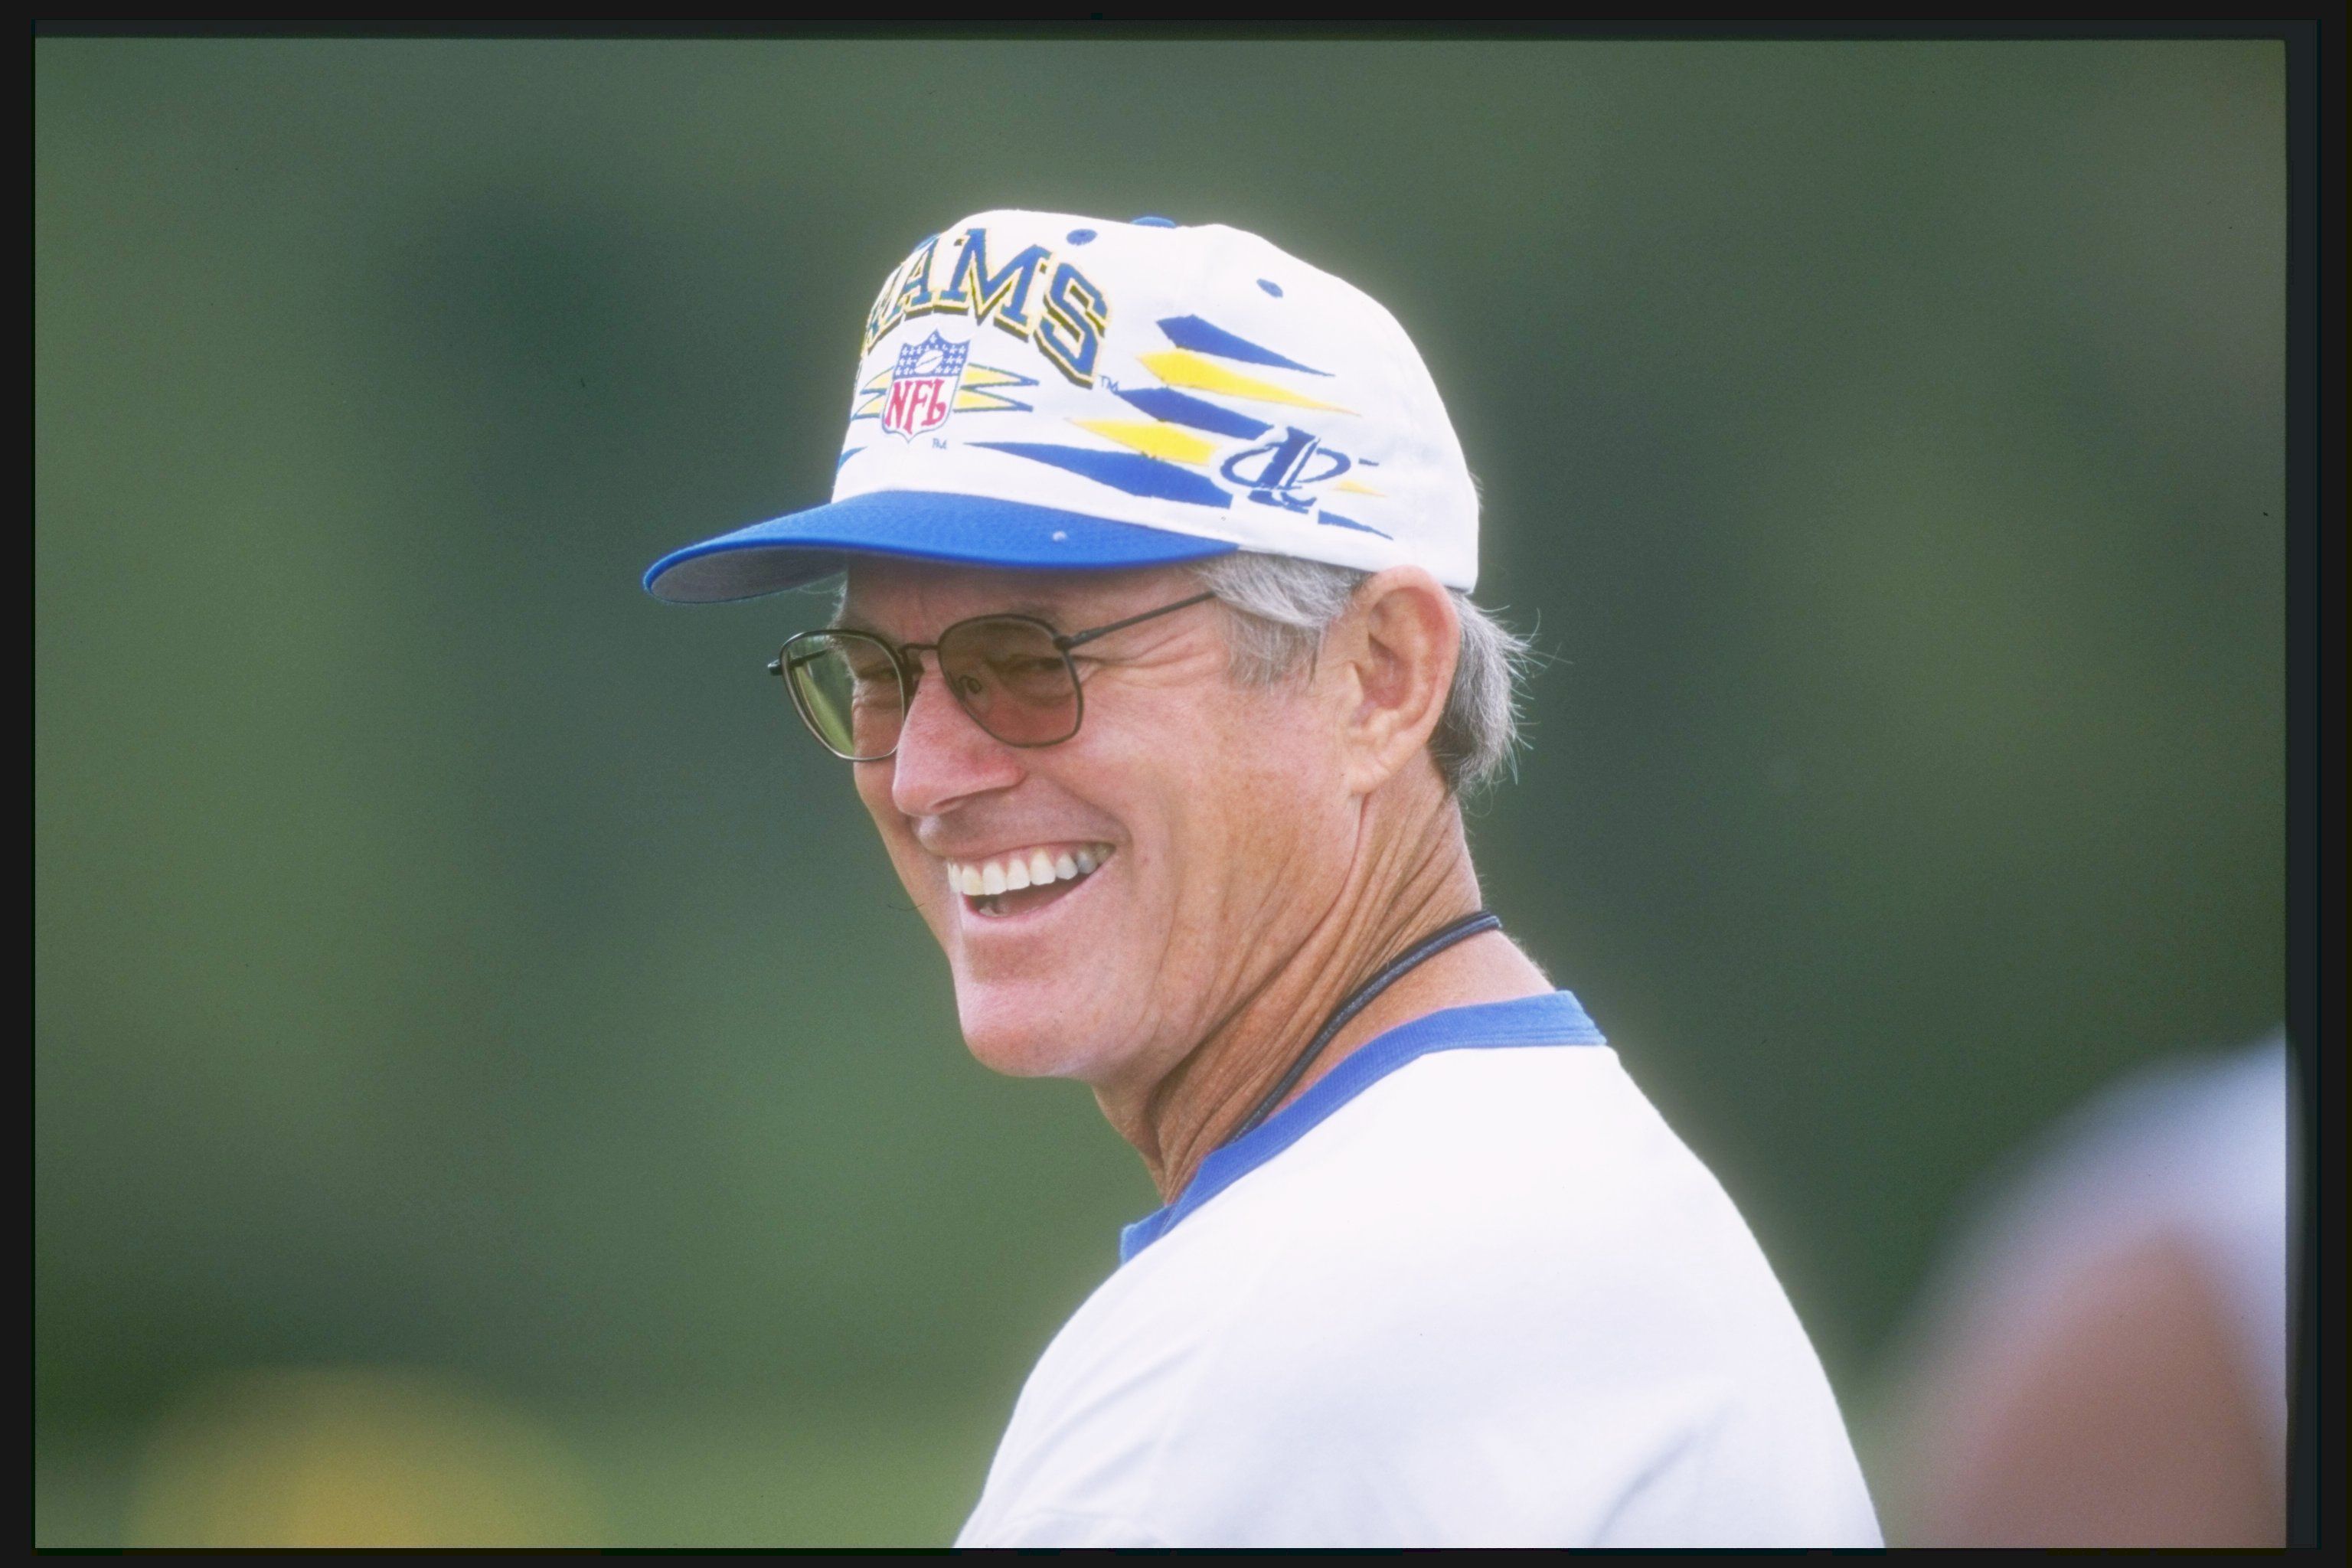 St. Louis Rams head coach Dick Vermeil looks on during training camp at Western Illinois University in Macomb, Illinois.